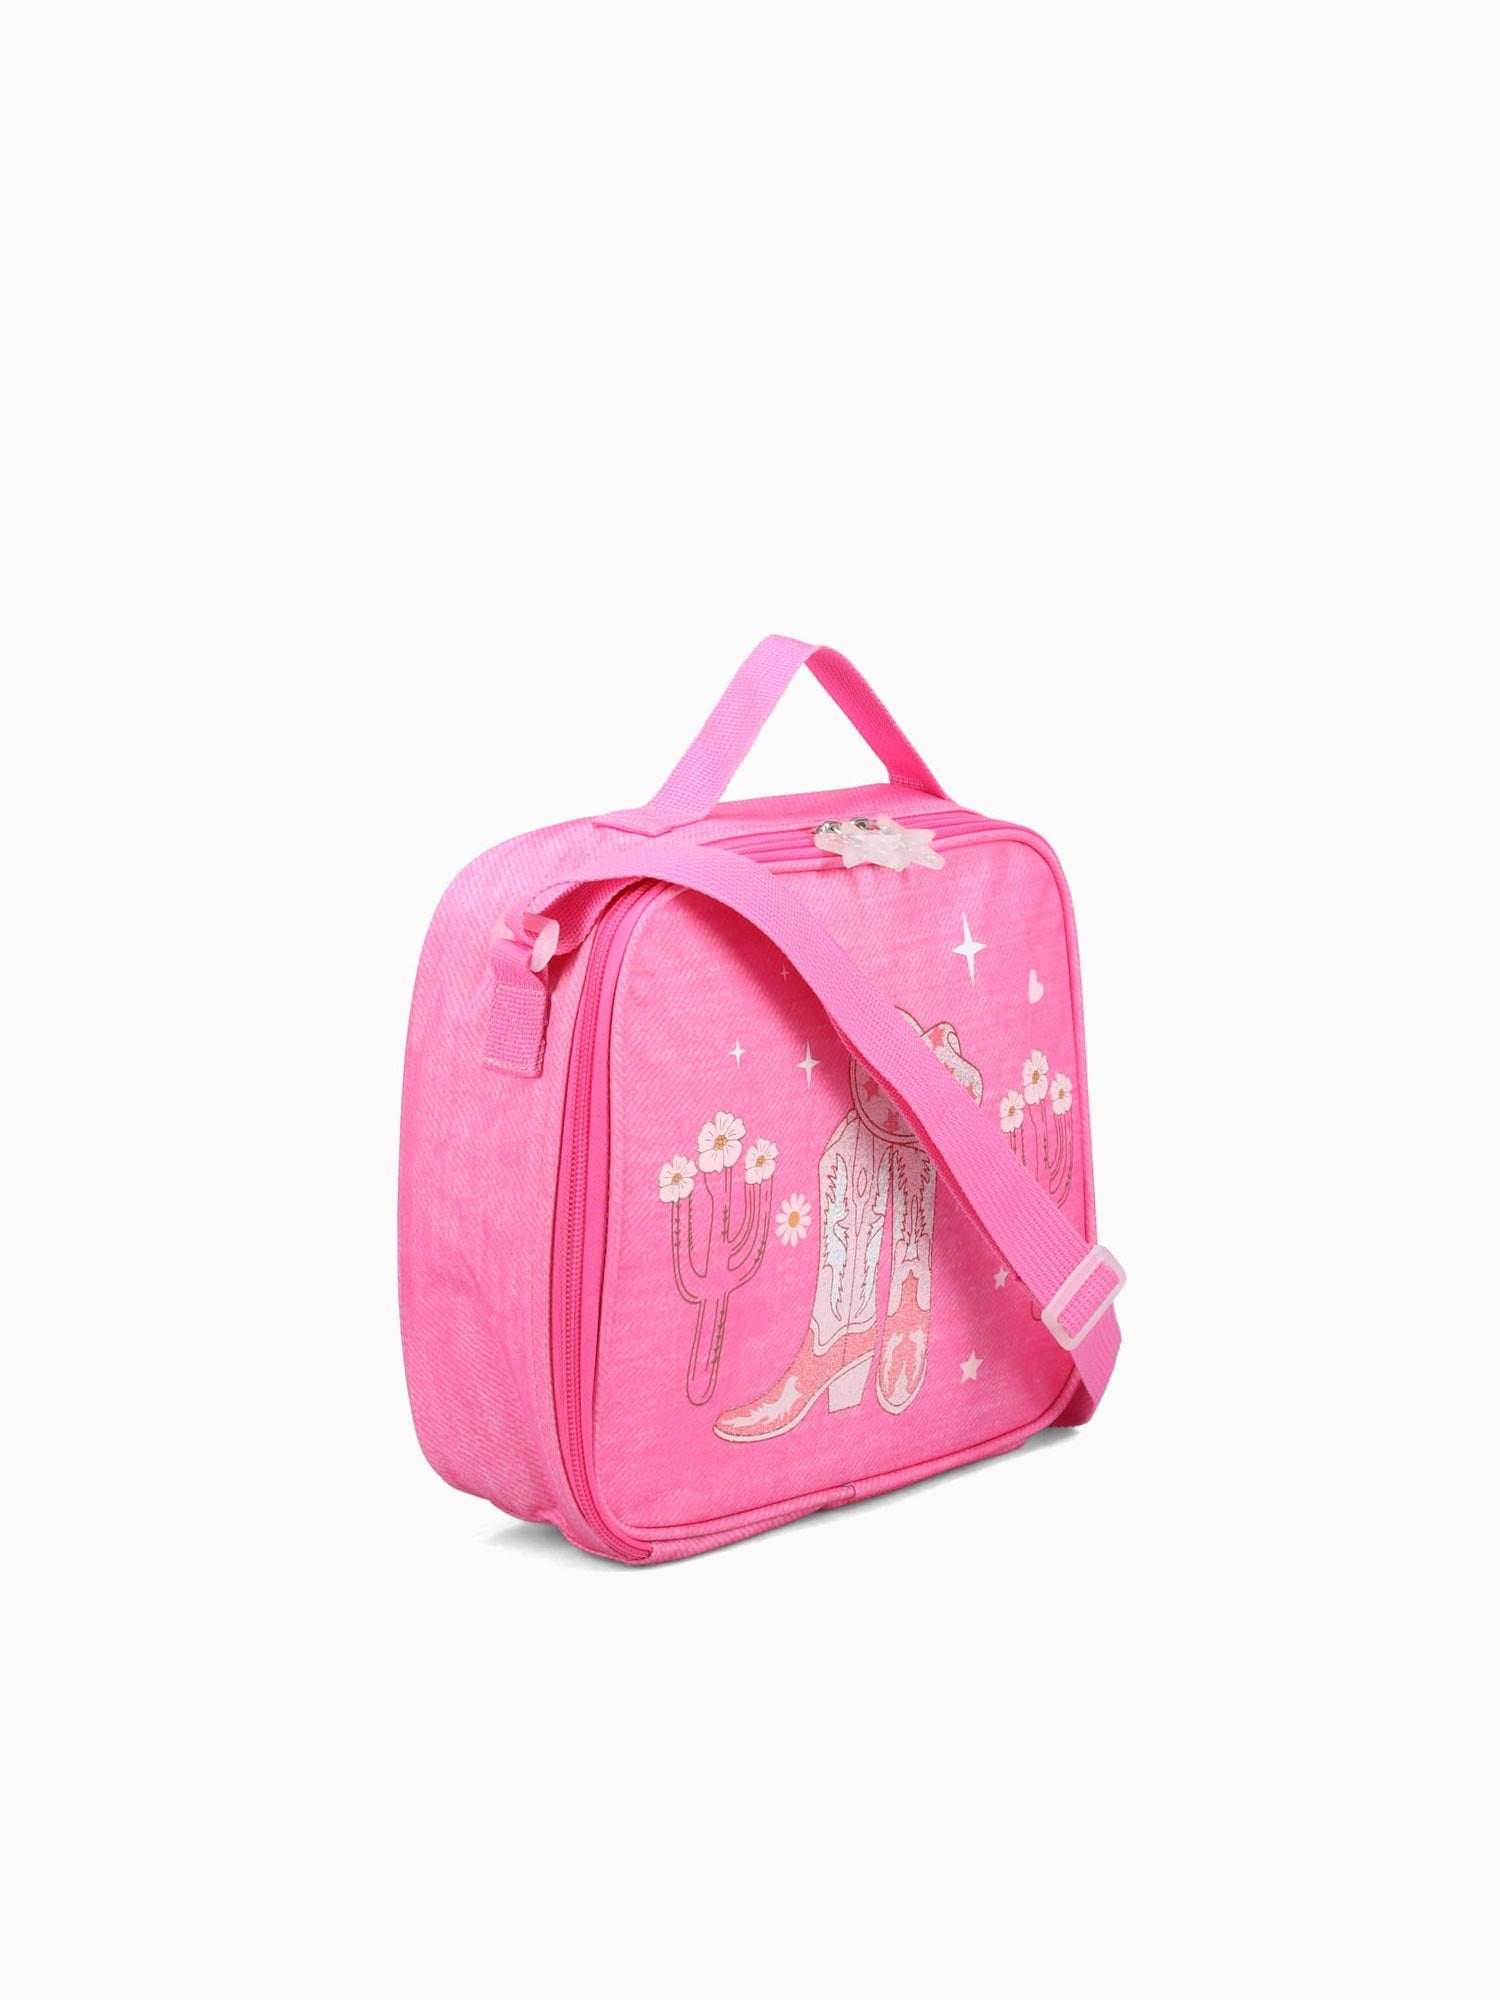 Cowgirl Lunchbag Pink Pink